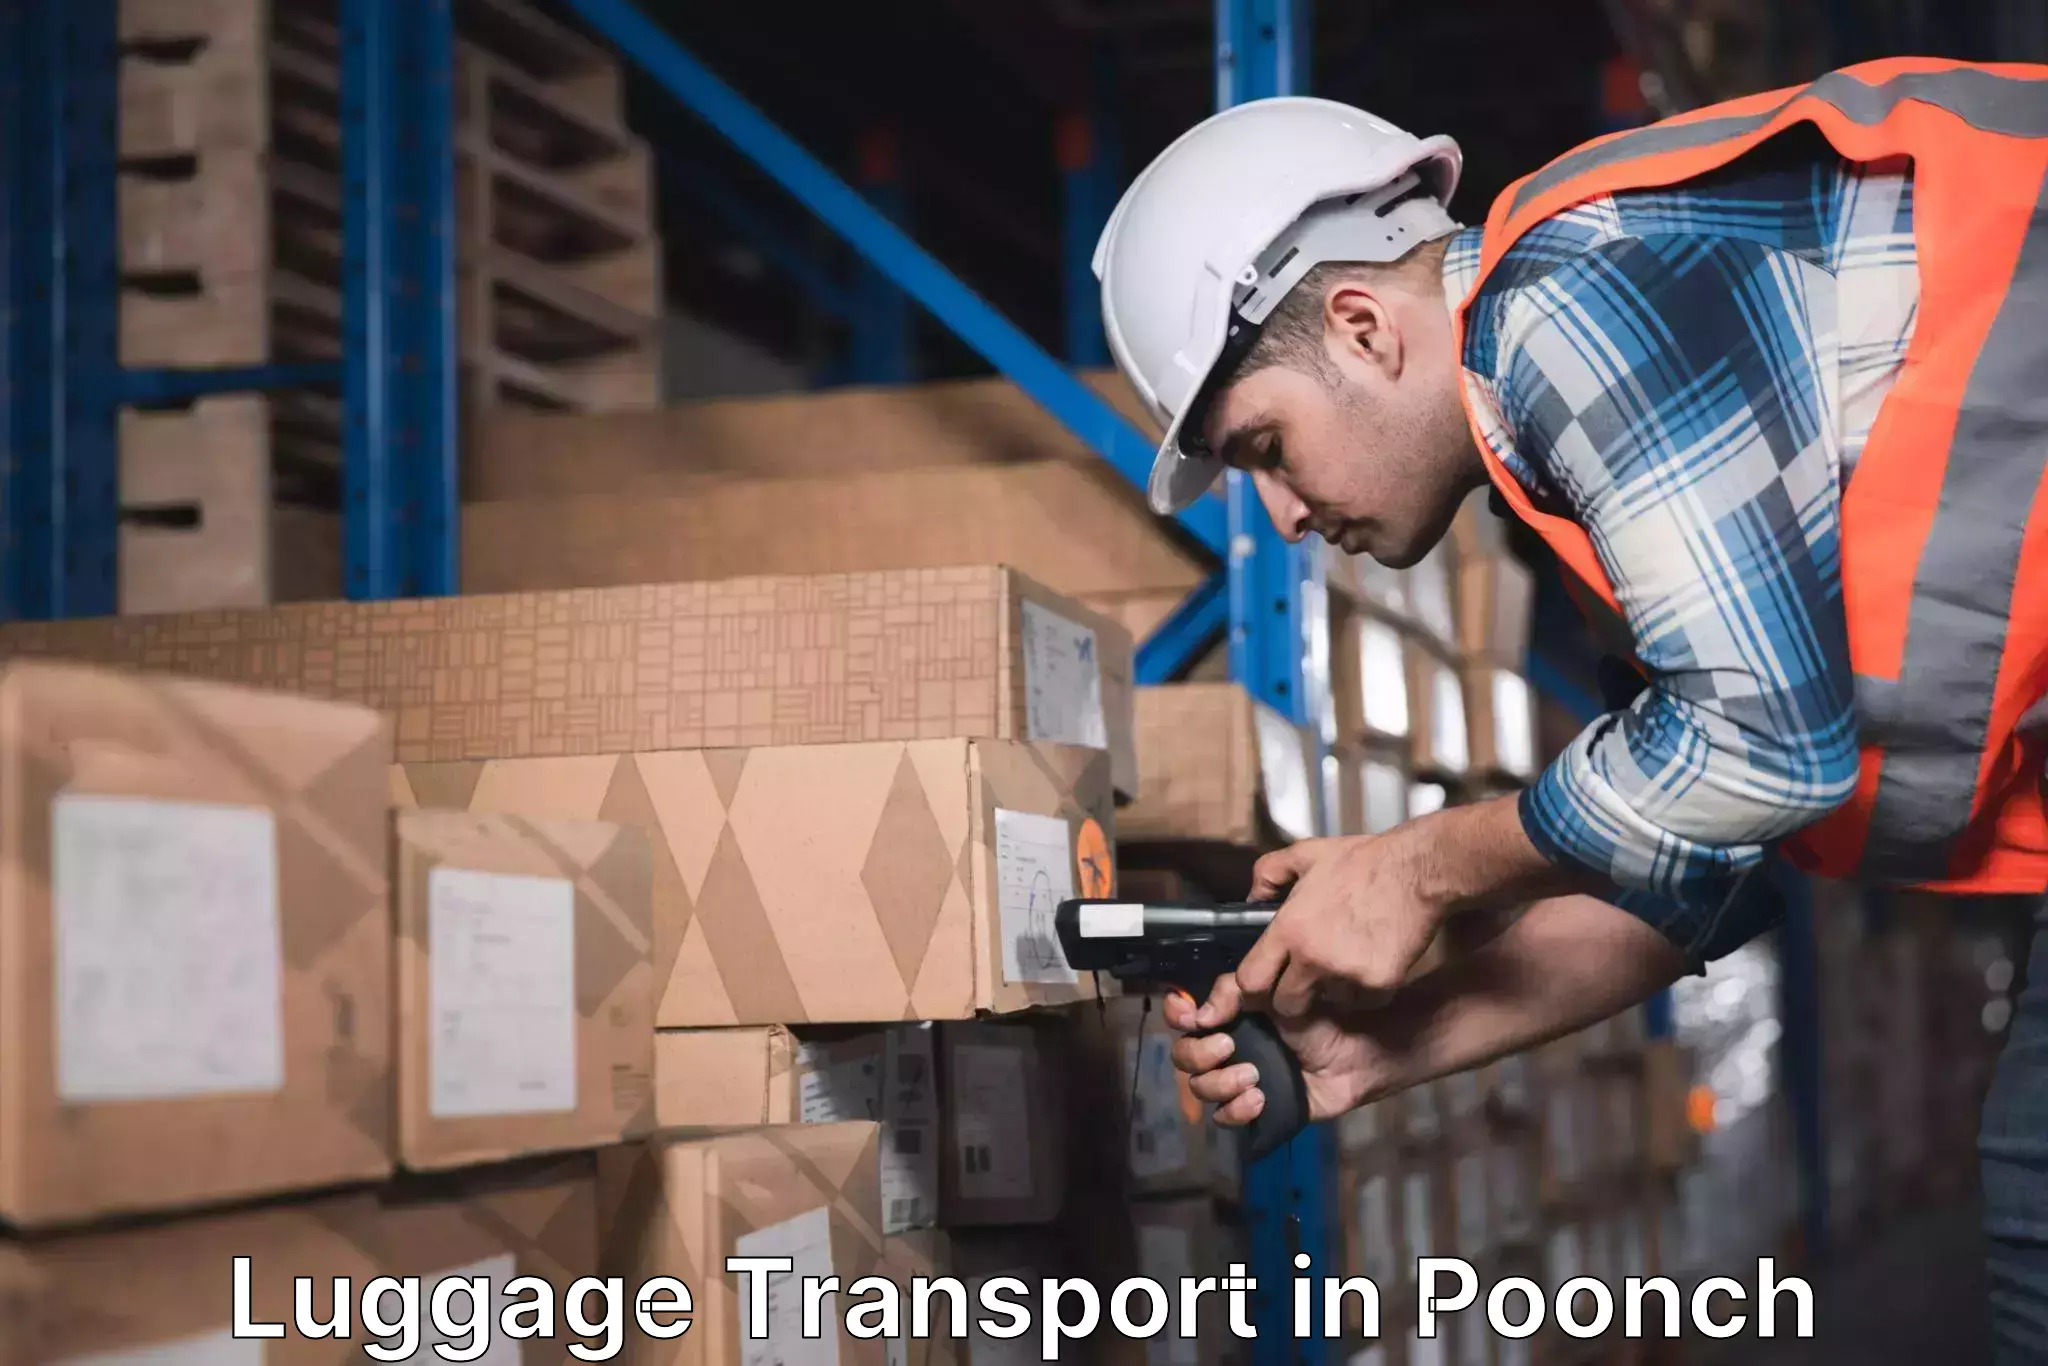 Baggage transport scheduler in Poonch